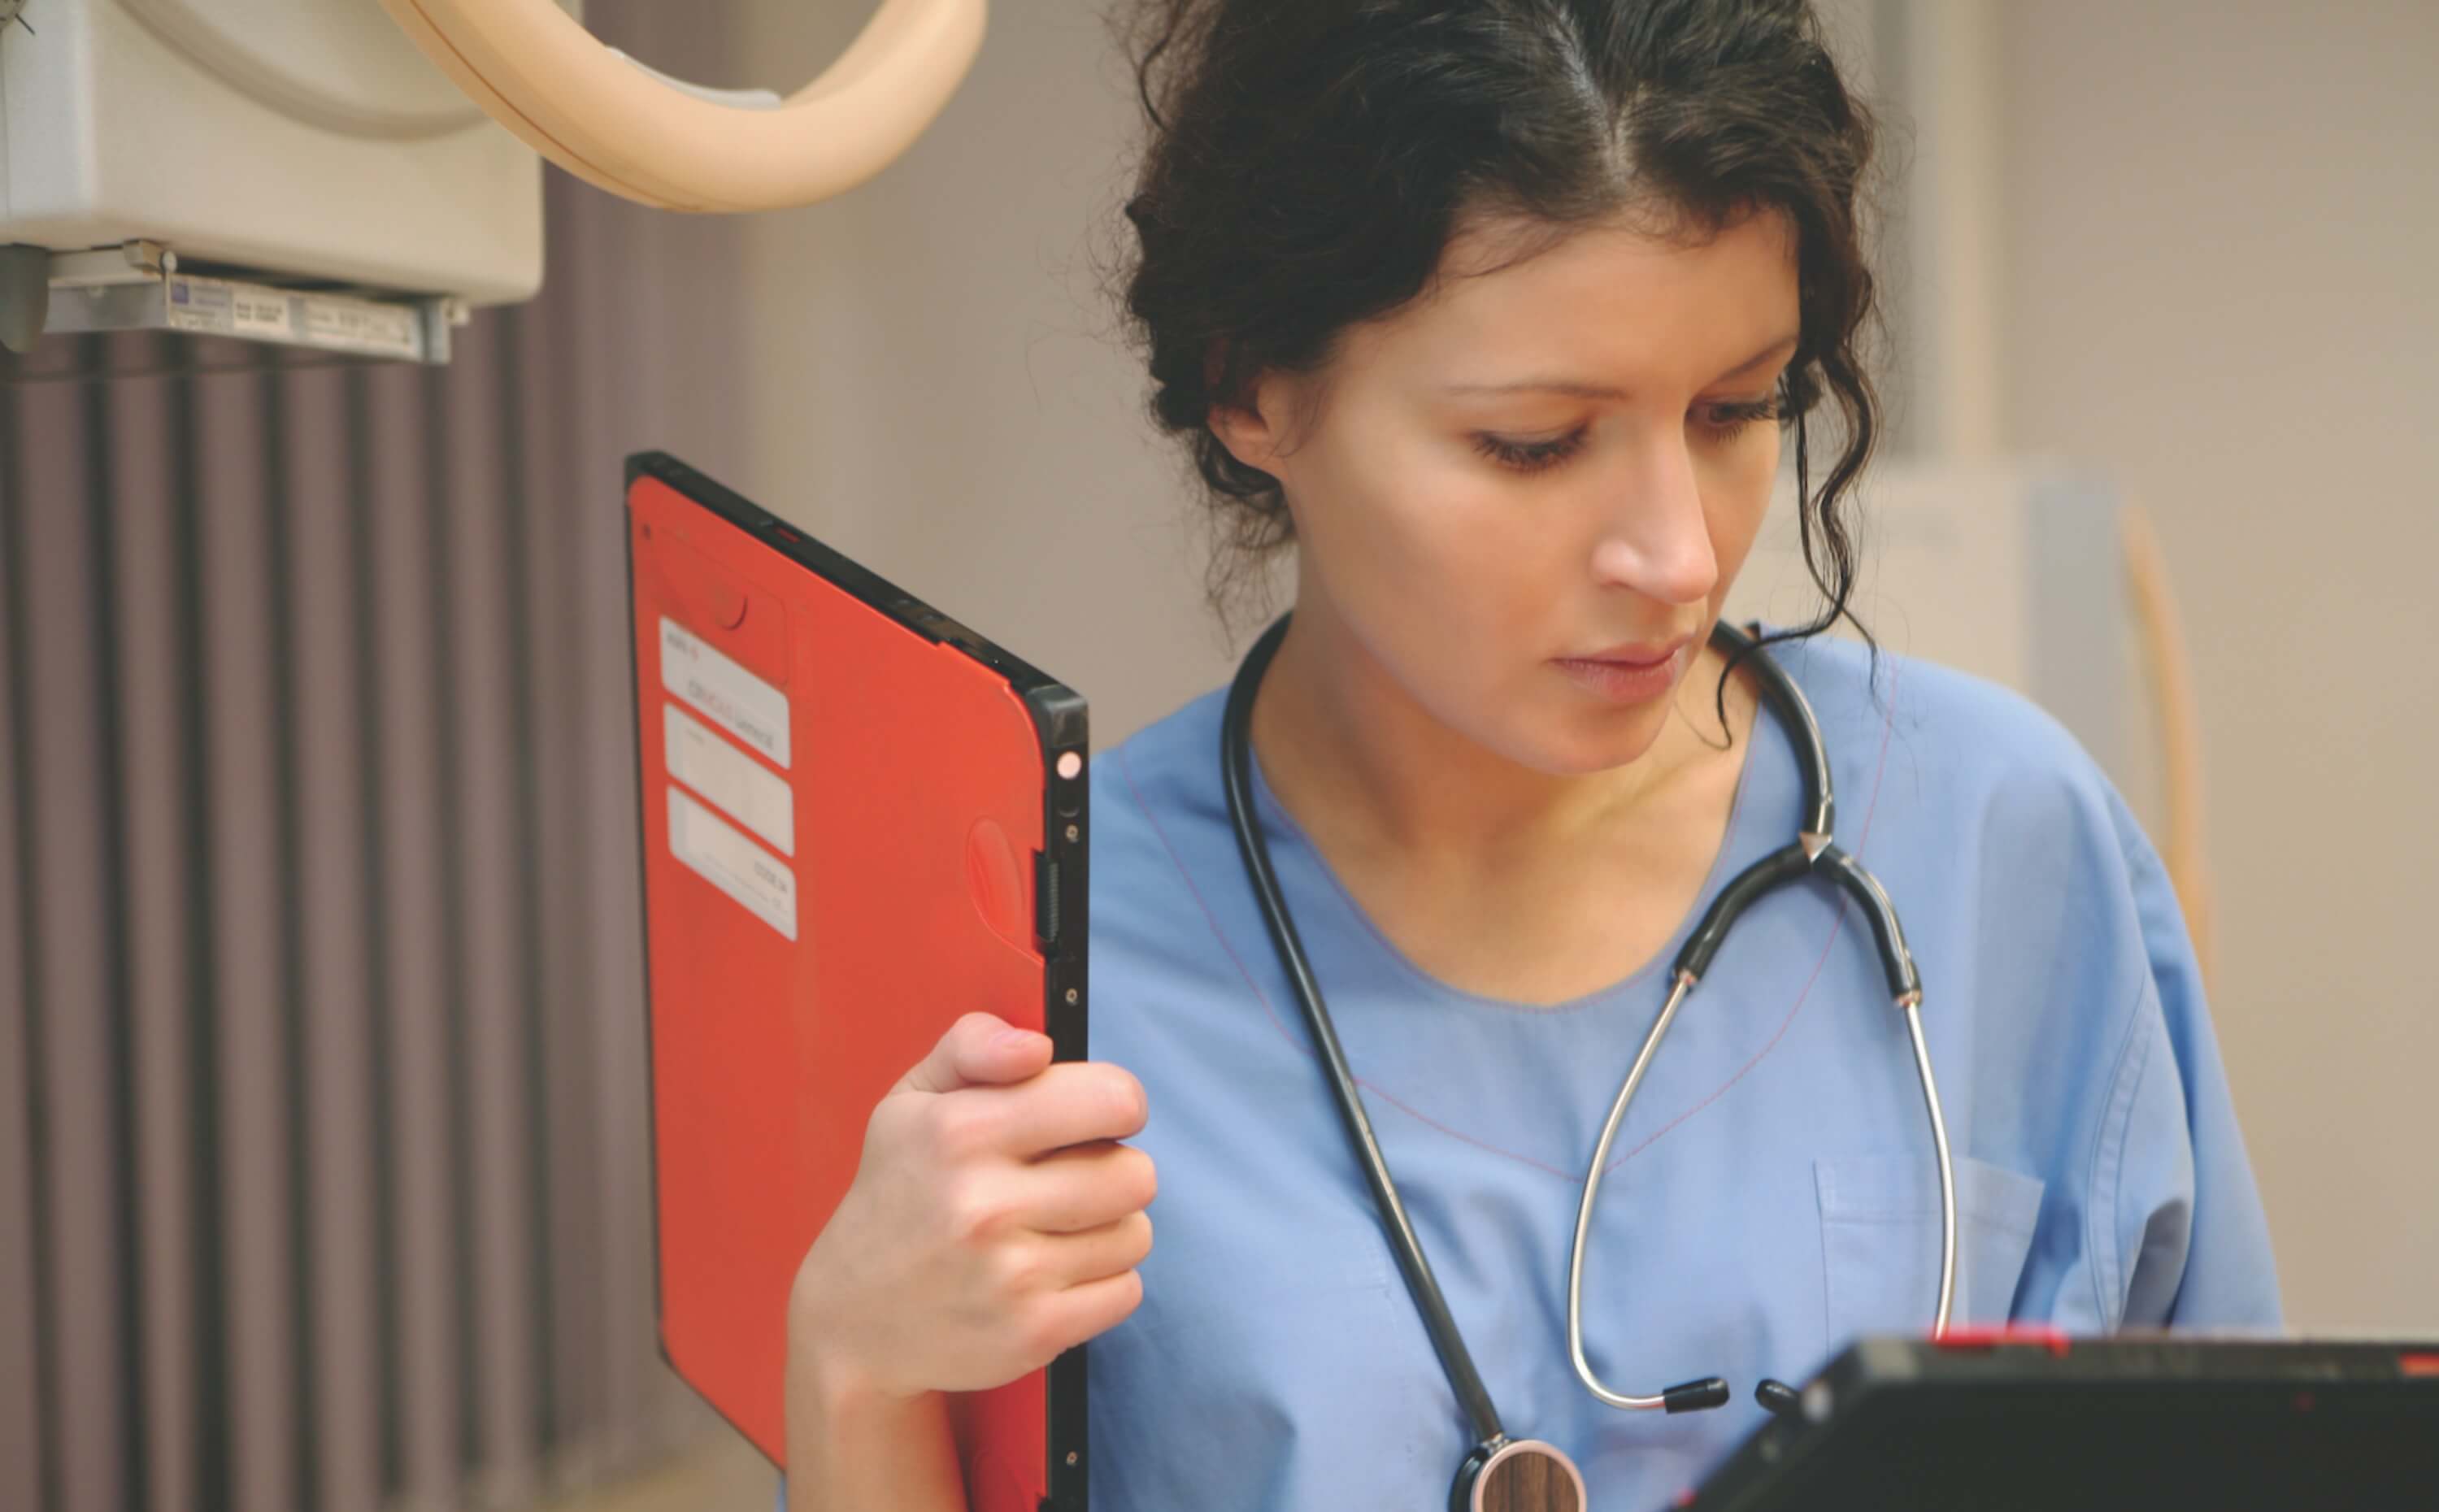 A female nurse entering information on a screen. She is holding a red file